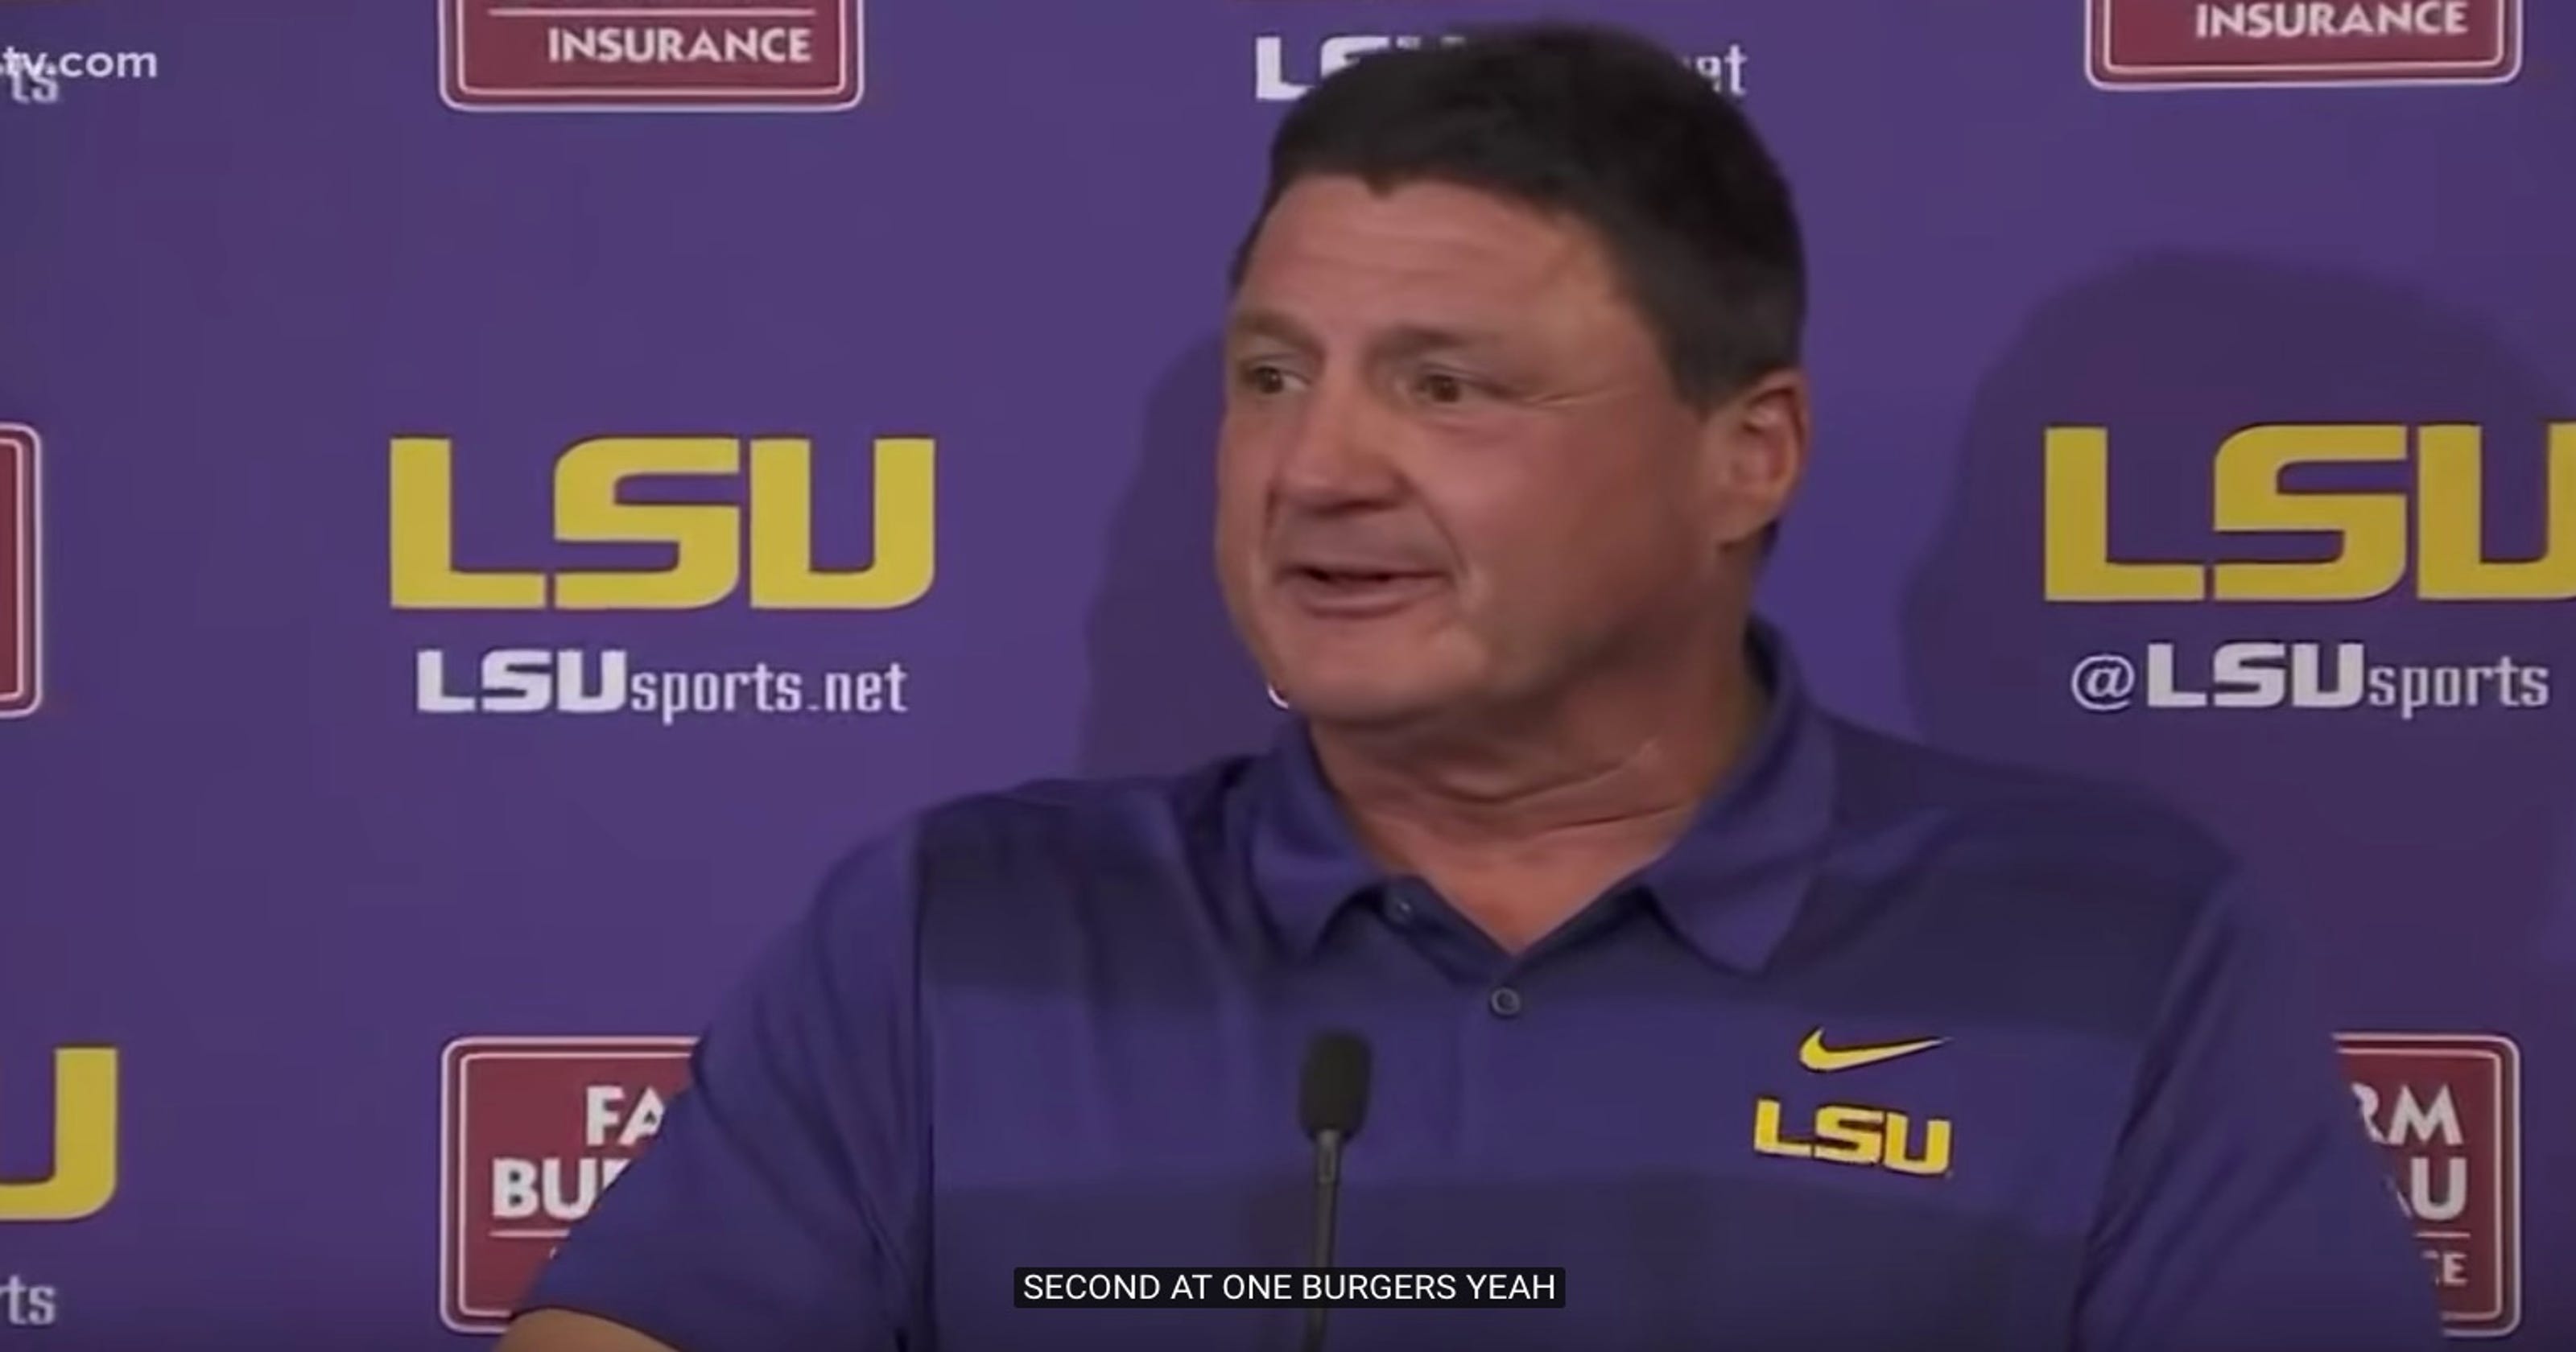 LSU: Closed captioning was no match for Ed Orgeron's press conference